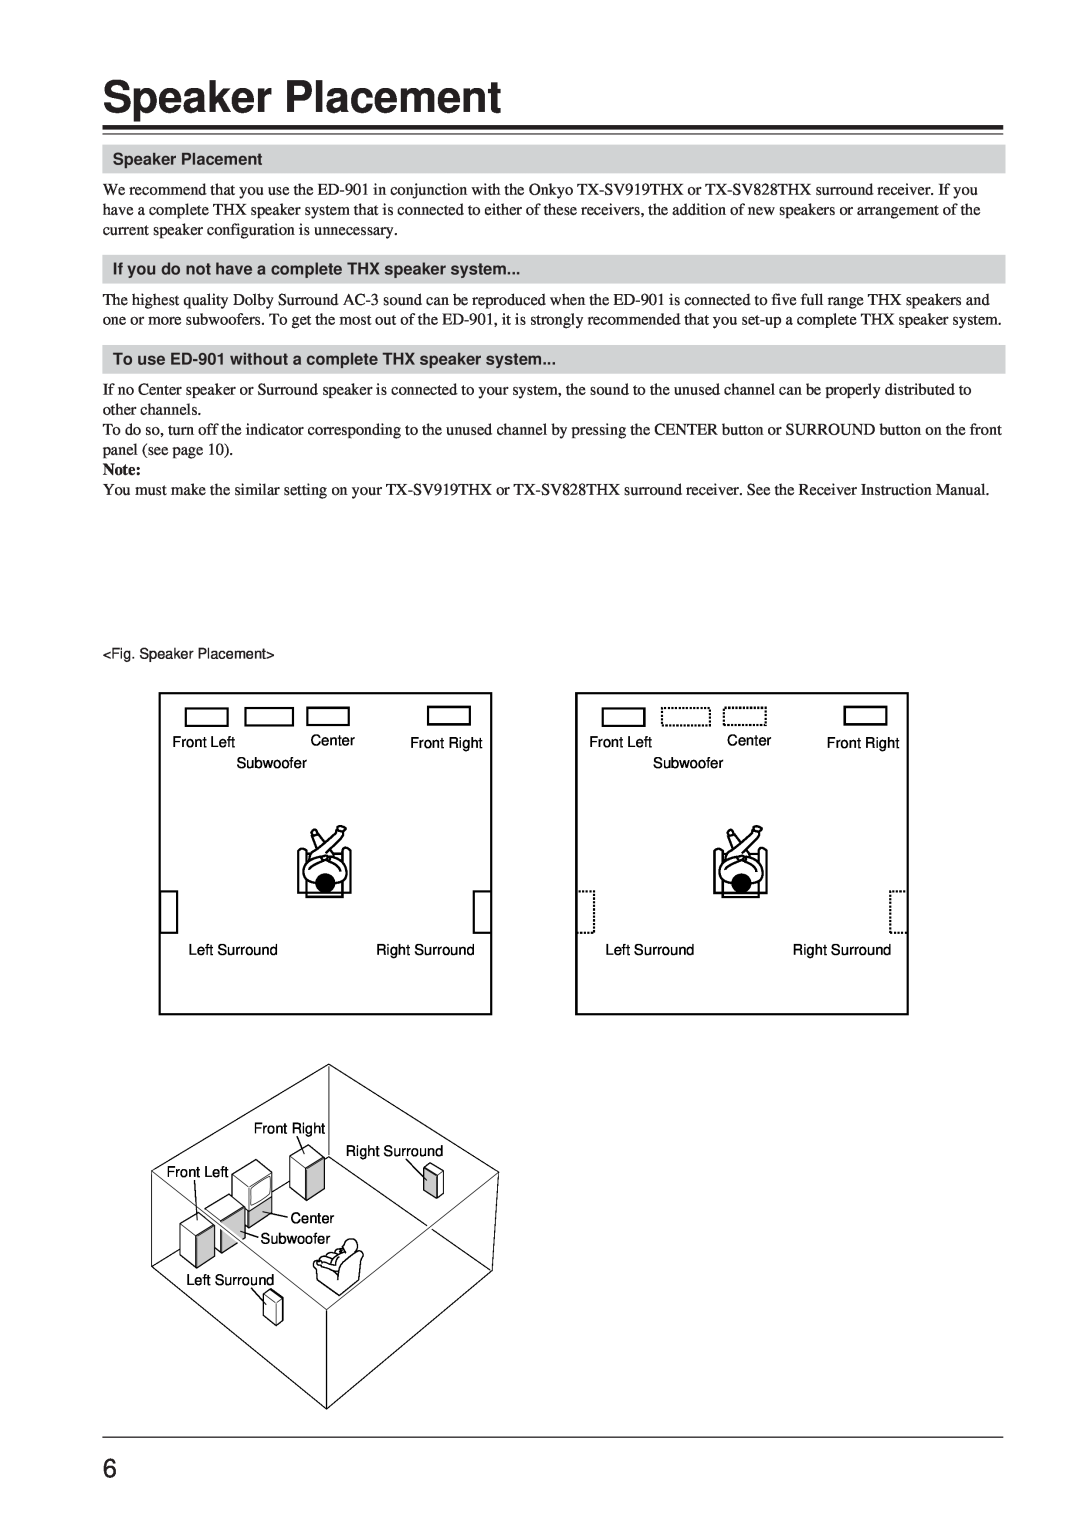 Onkyo ED-901 instruction manual Speaker Placement, If you do not have a complete THX speaker system 